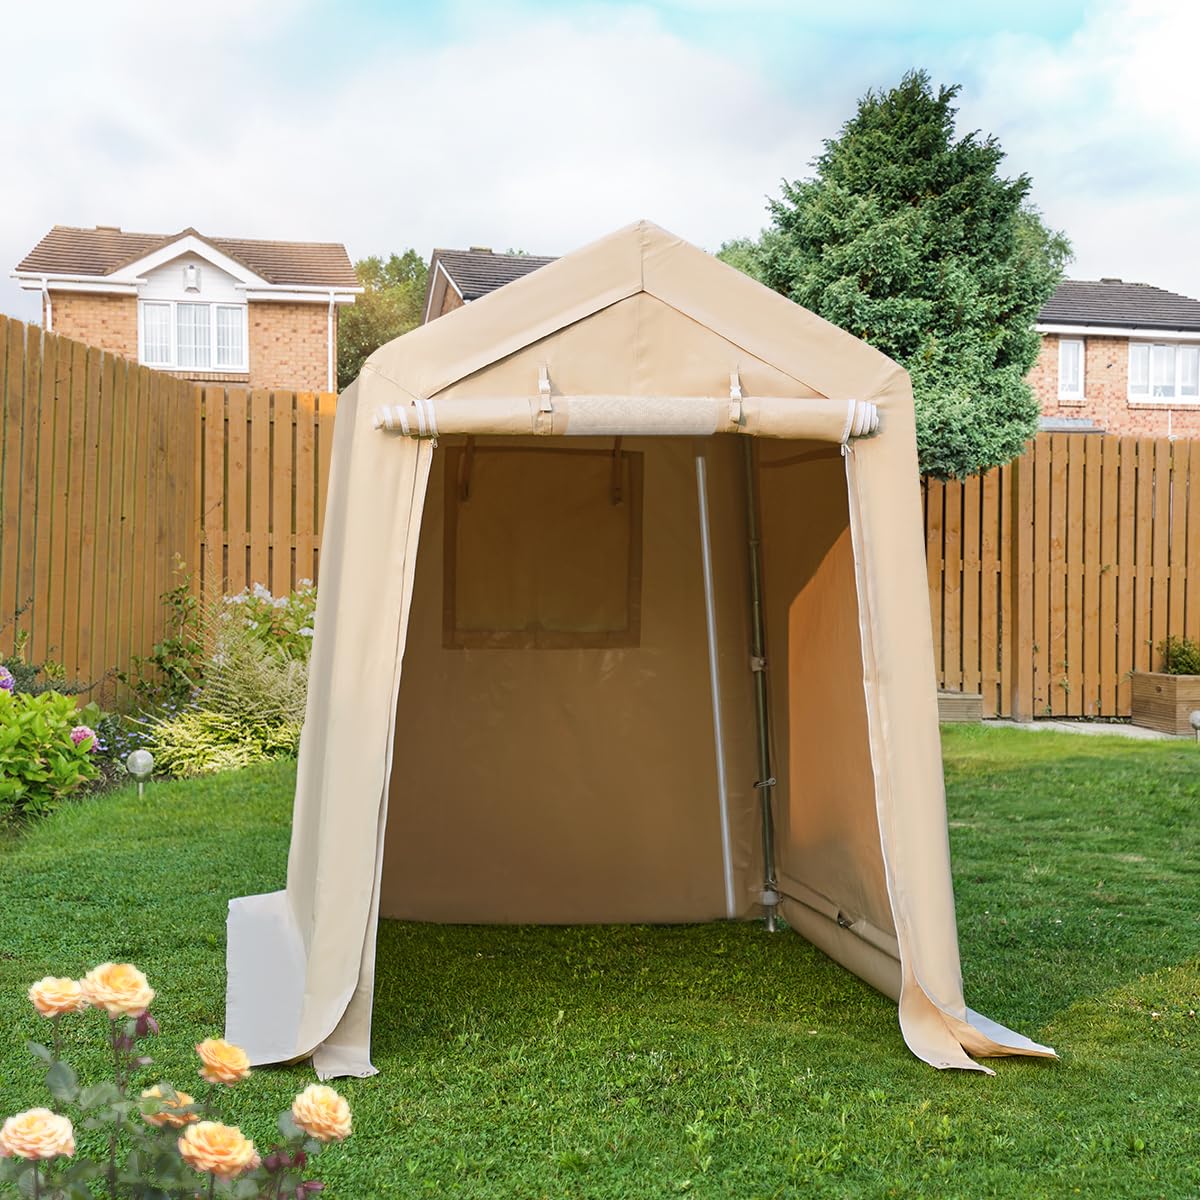 ADVANCE OUTDOOR 6x8 ft Outdoor Portable Storage Shelter Shed with 2 Roll up Zipper Doors & Vents Carport for Motorcycle Waterproof and UV Resistant Anti-Snow Portable Garage Kit Tent, Beige